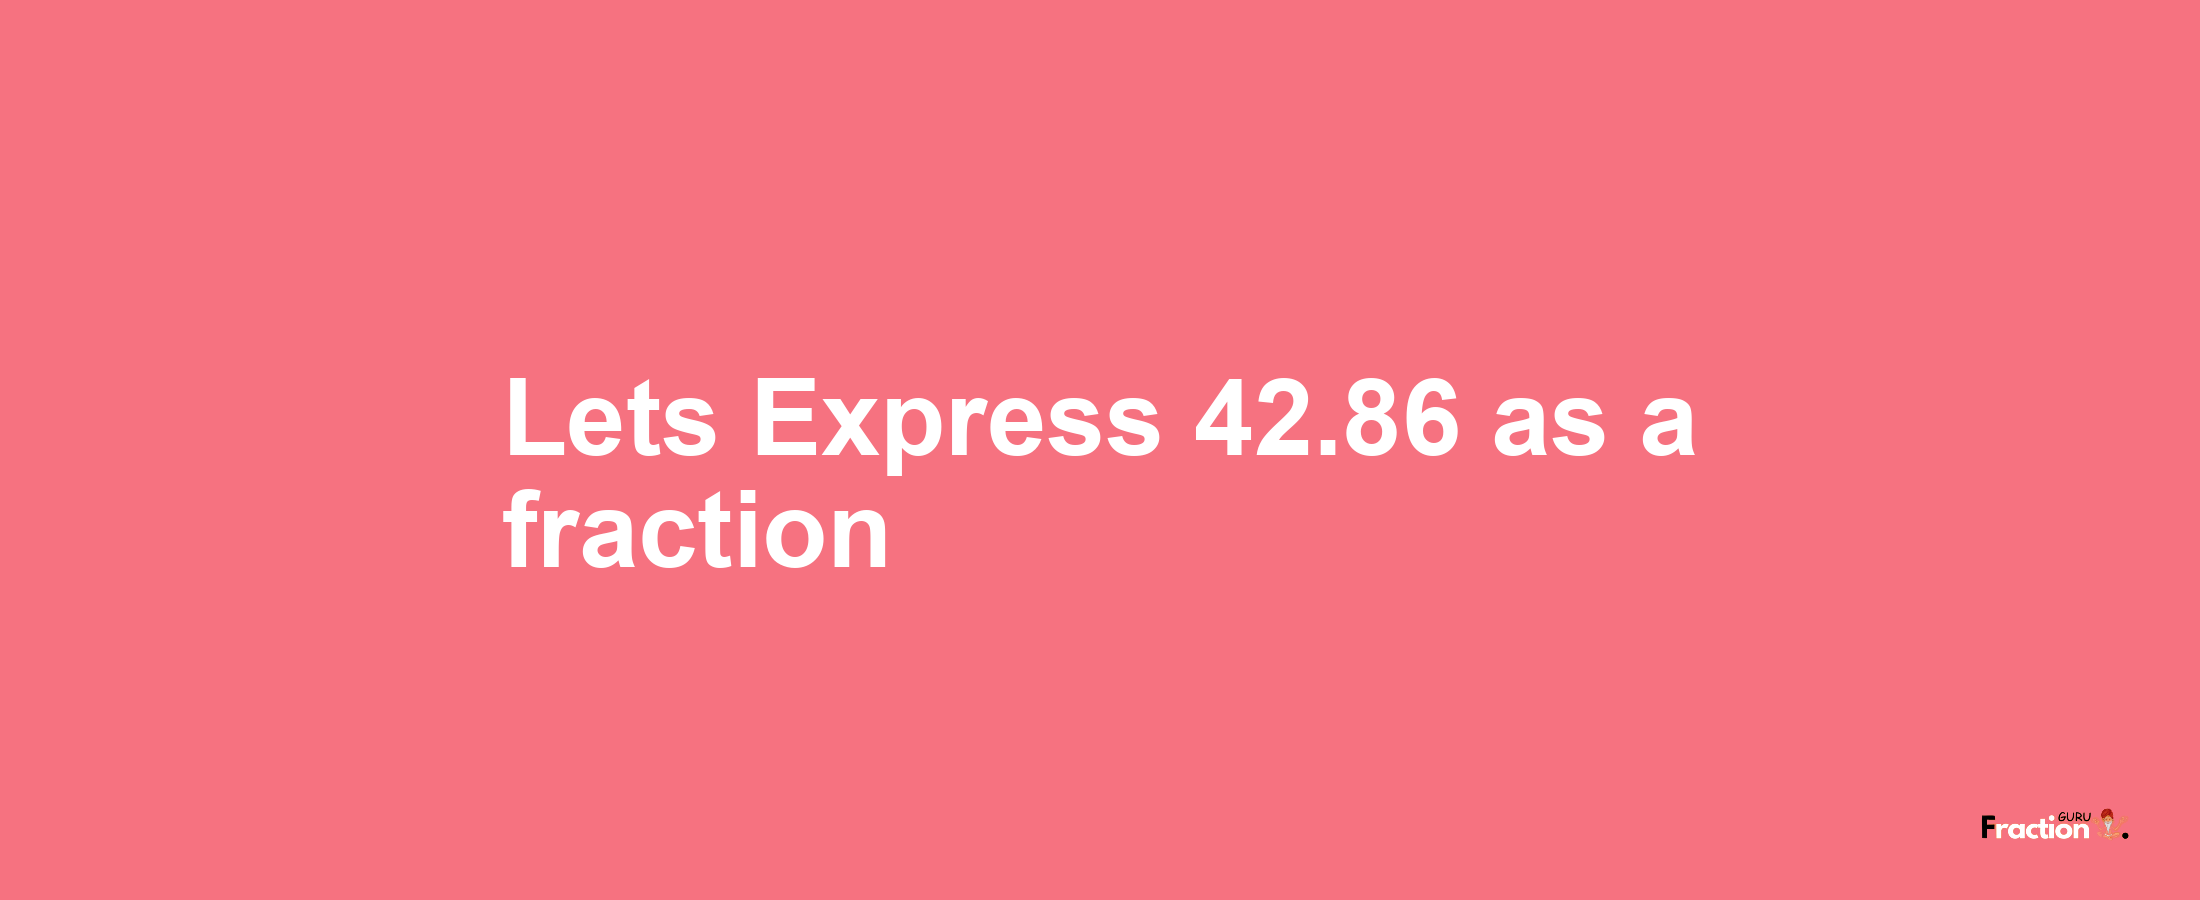 Lets Express 42.86 as afraction